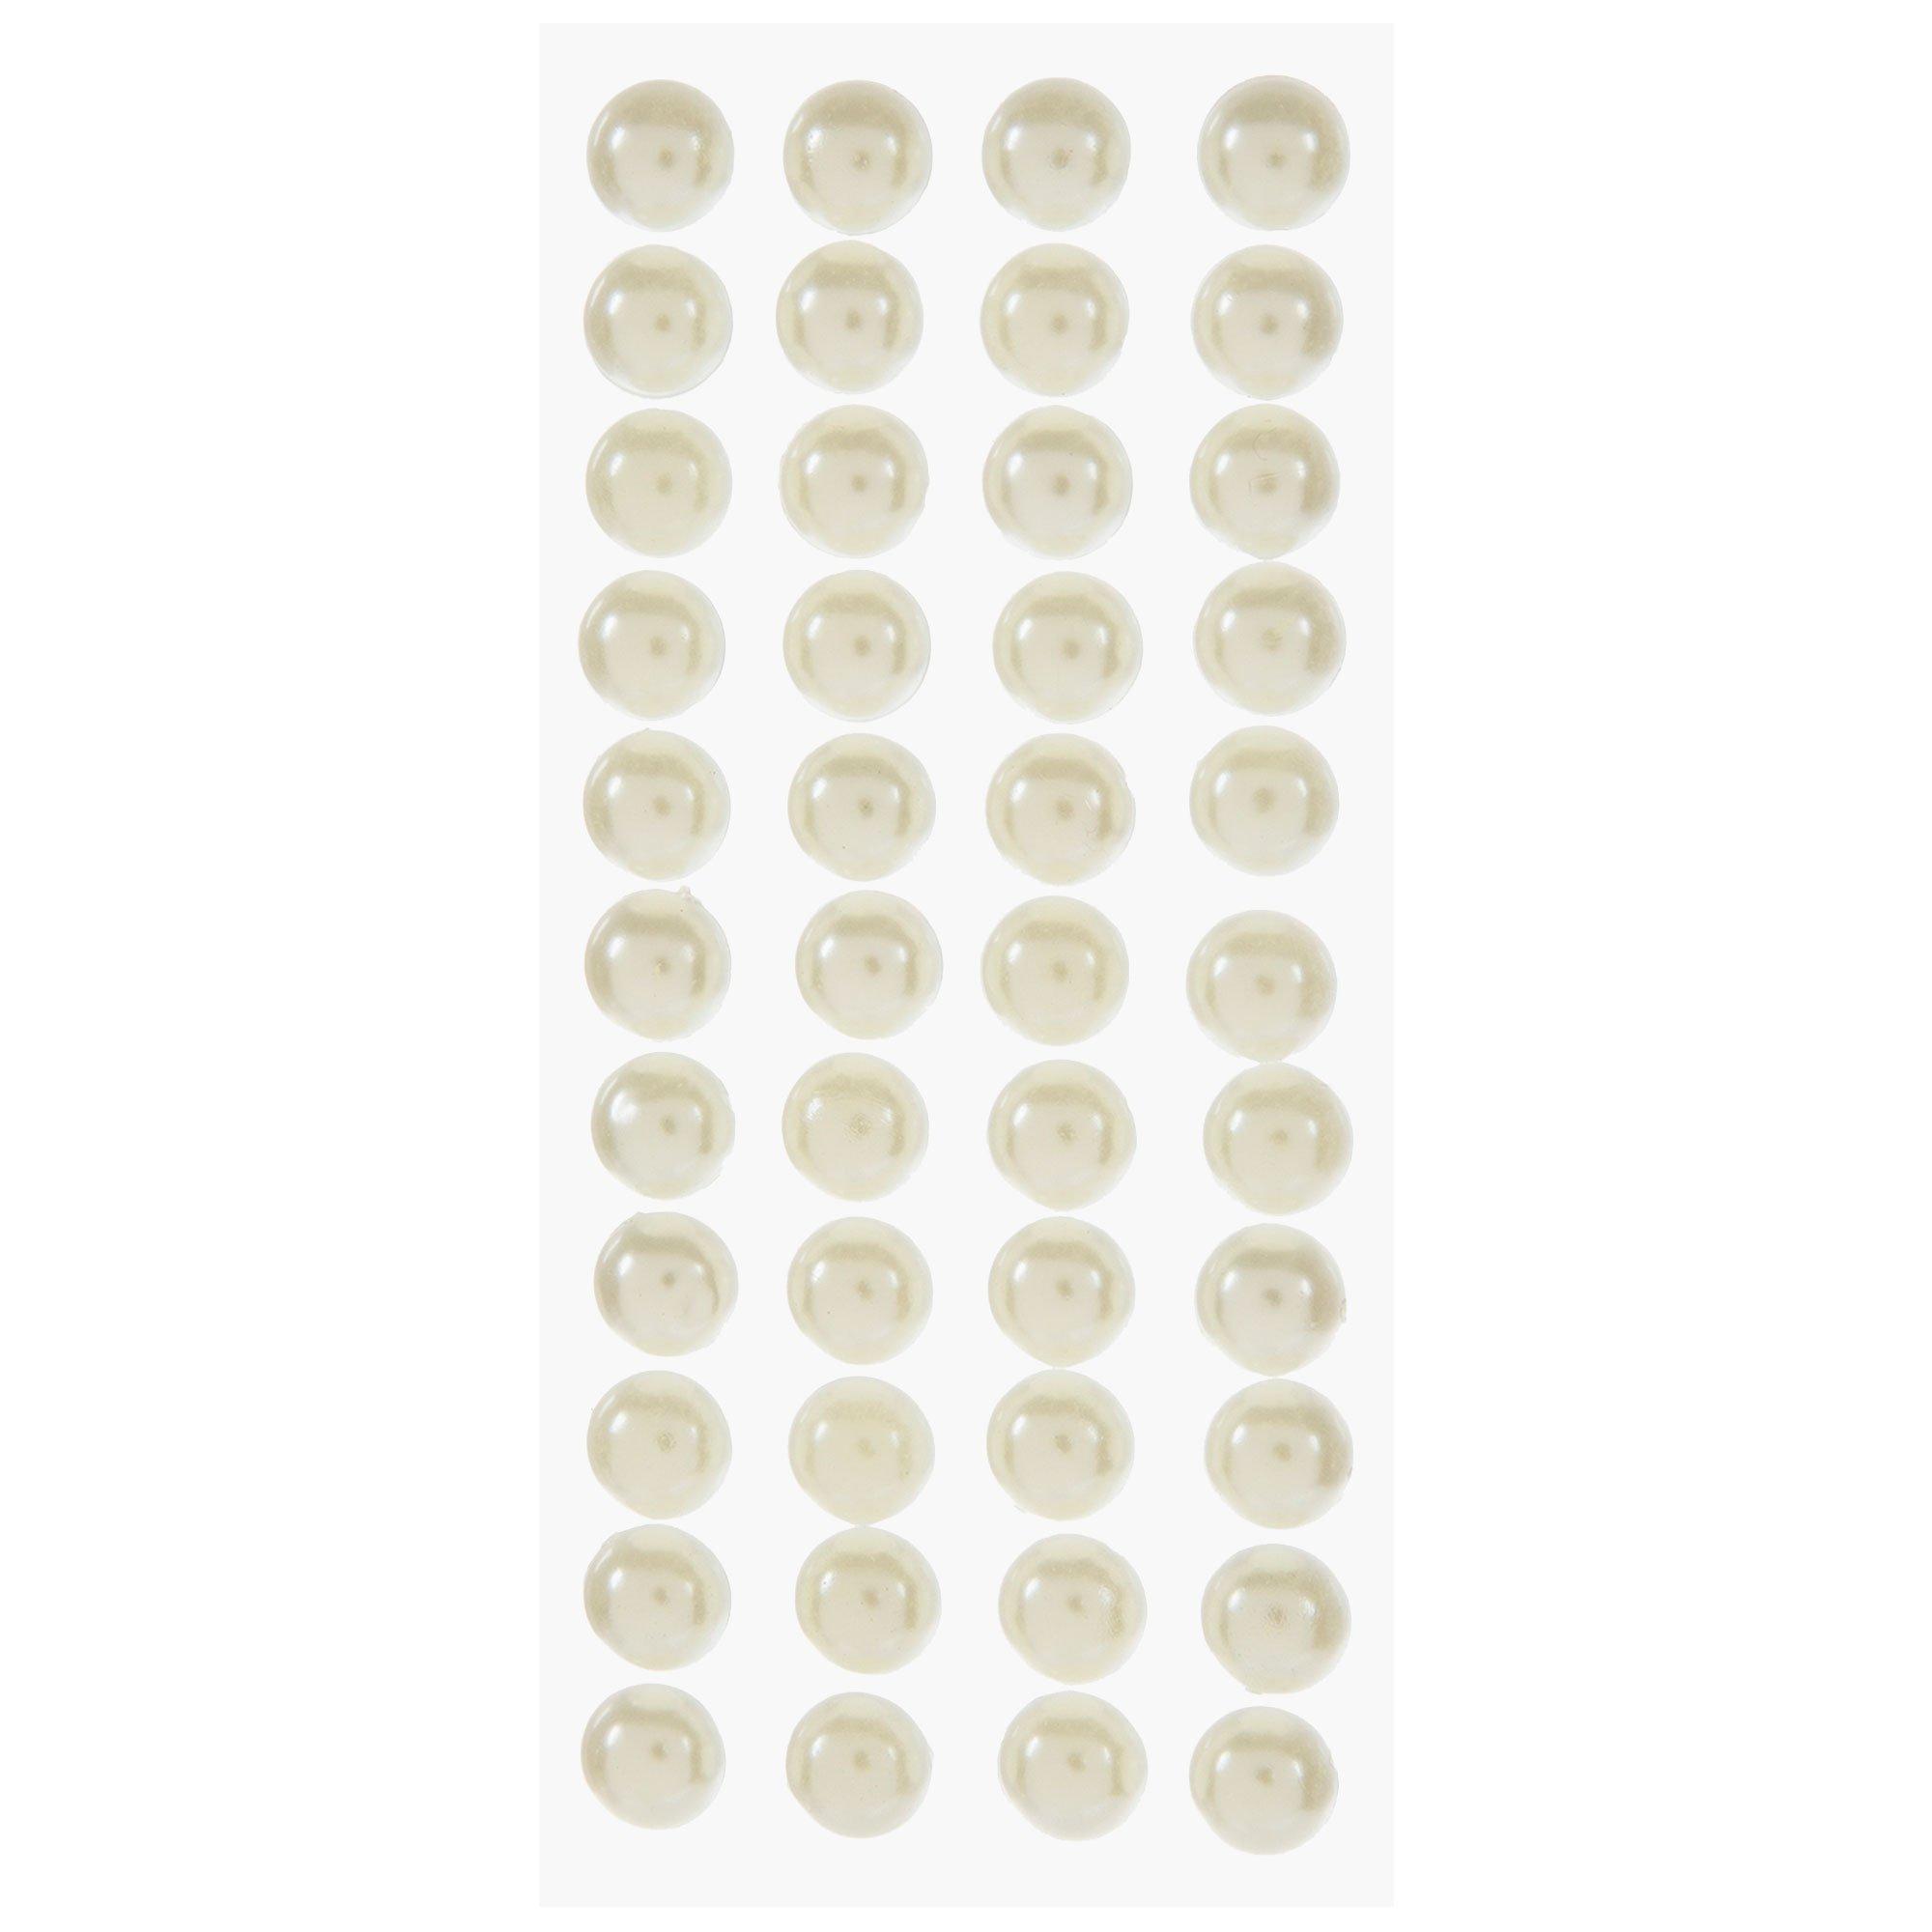 Adhesive Pearl Stickers Crafts  Scrapbooking Beads Stickers